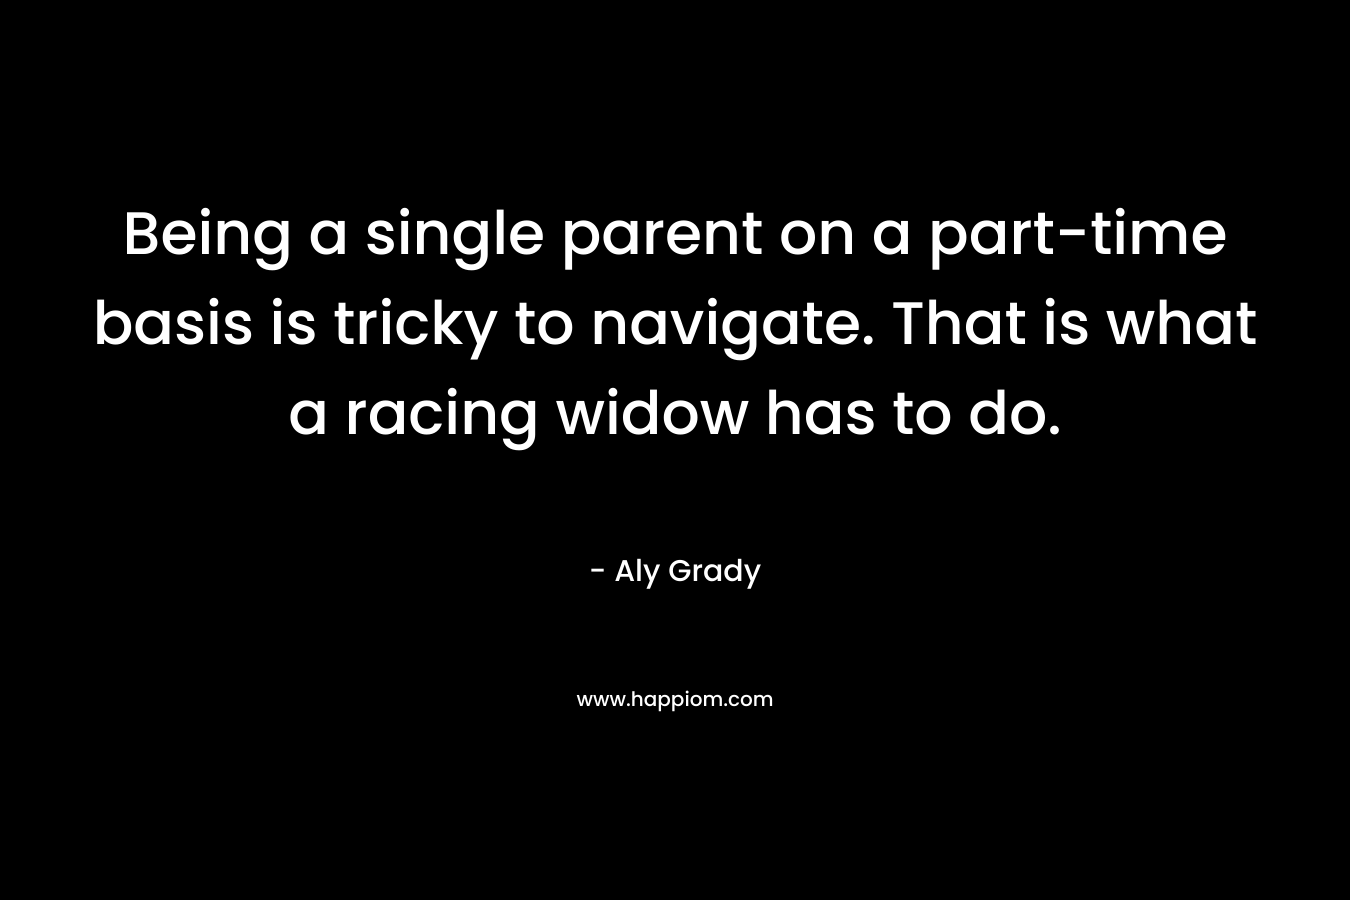 Being a single parent on a part-time basis is tricky to navigate. That is what a racing widow has to do.